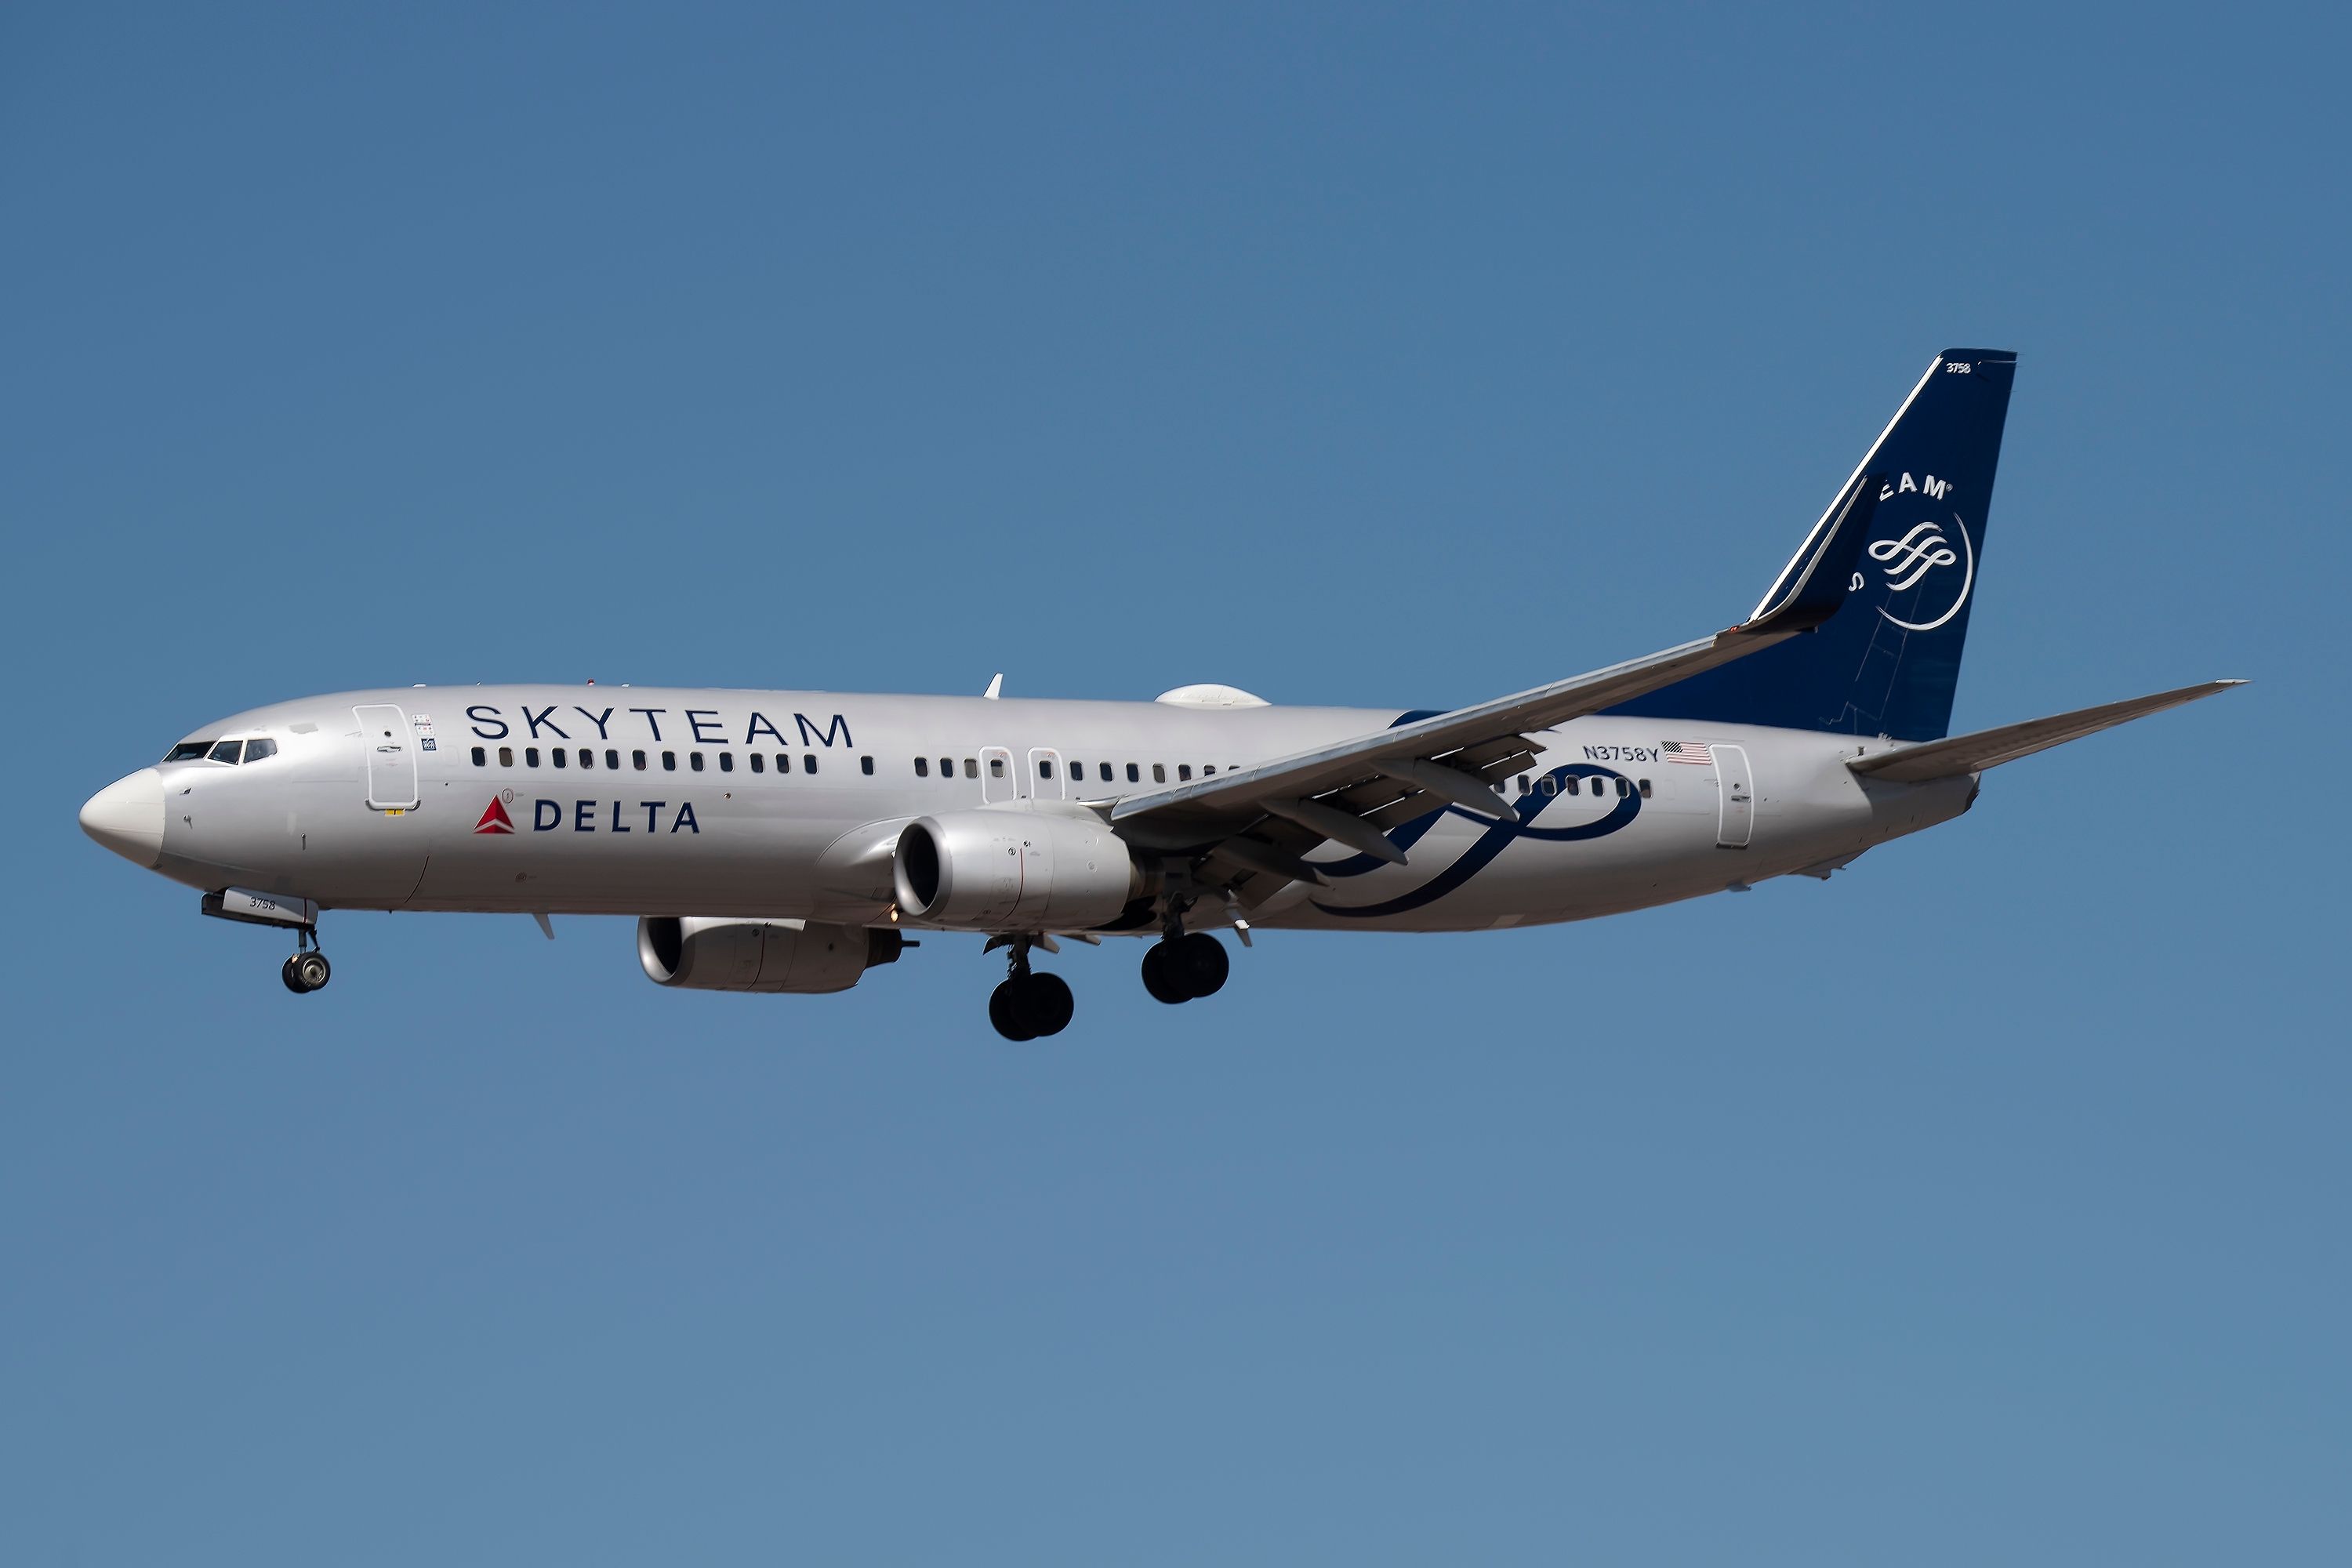 A Delta Air Lines Boeing 737 flying in a special SkyTeam livery